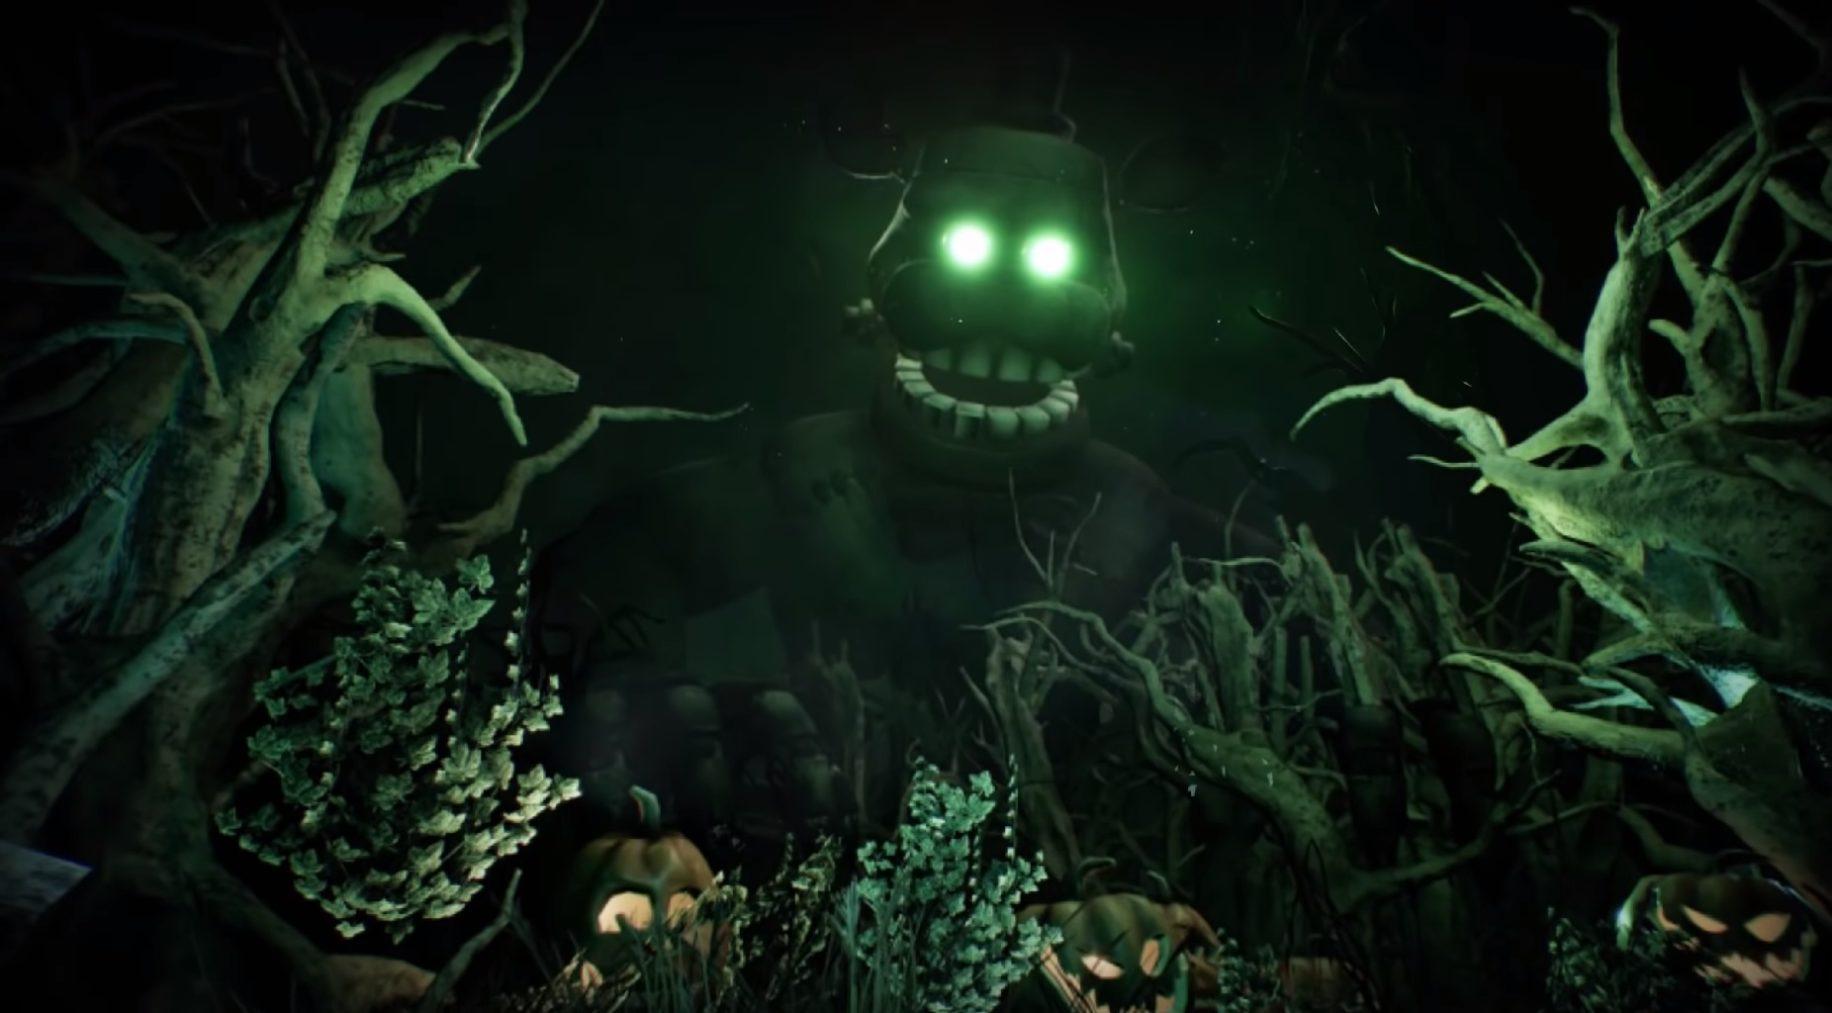 New Five Nights At Freddy's VR DLC Is On